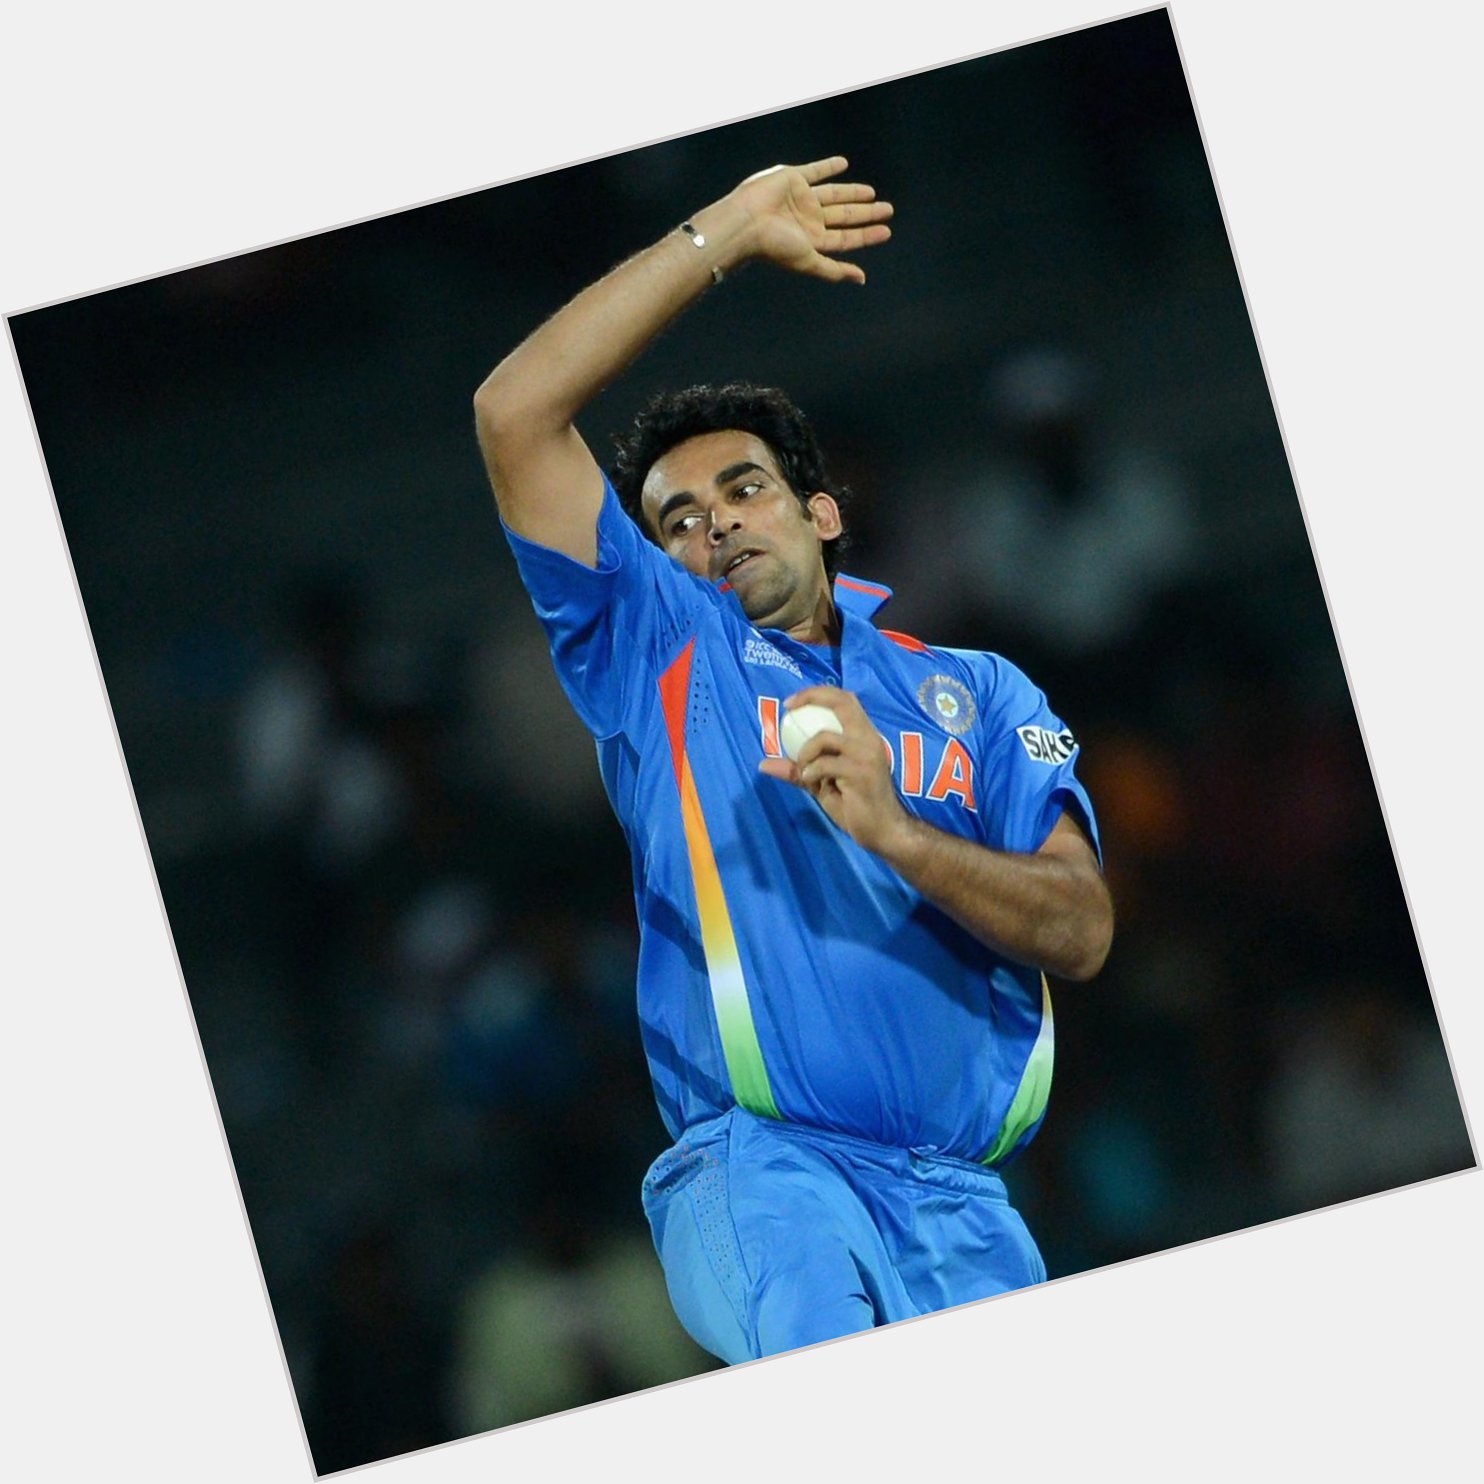 Happy Birthday to Zaheer Khan   About:  